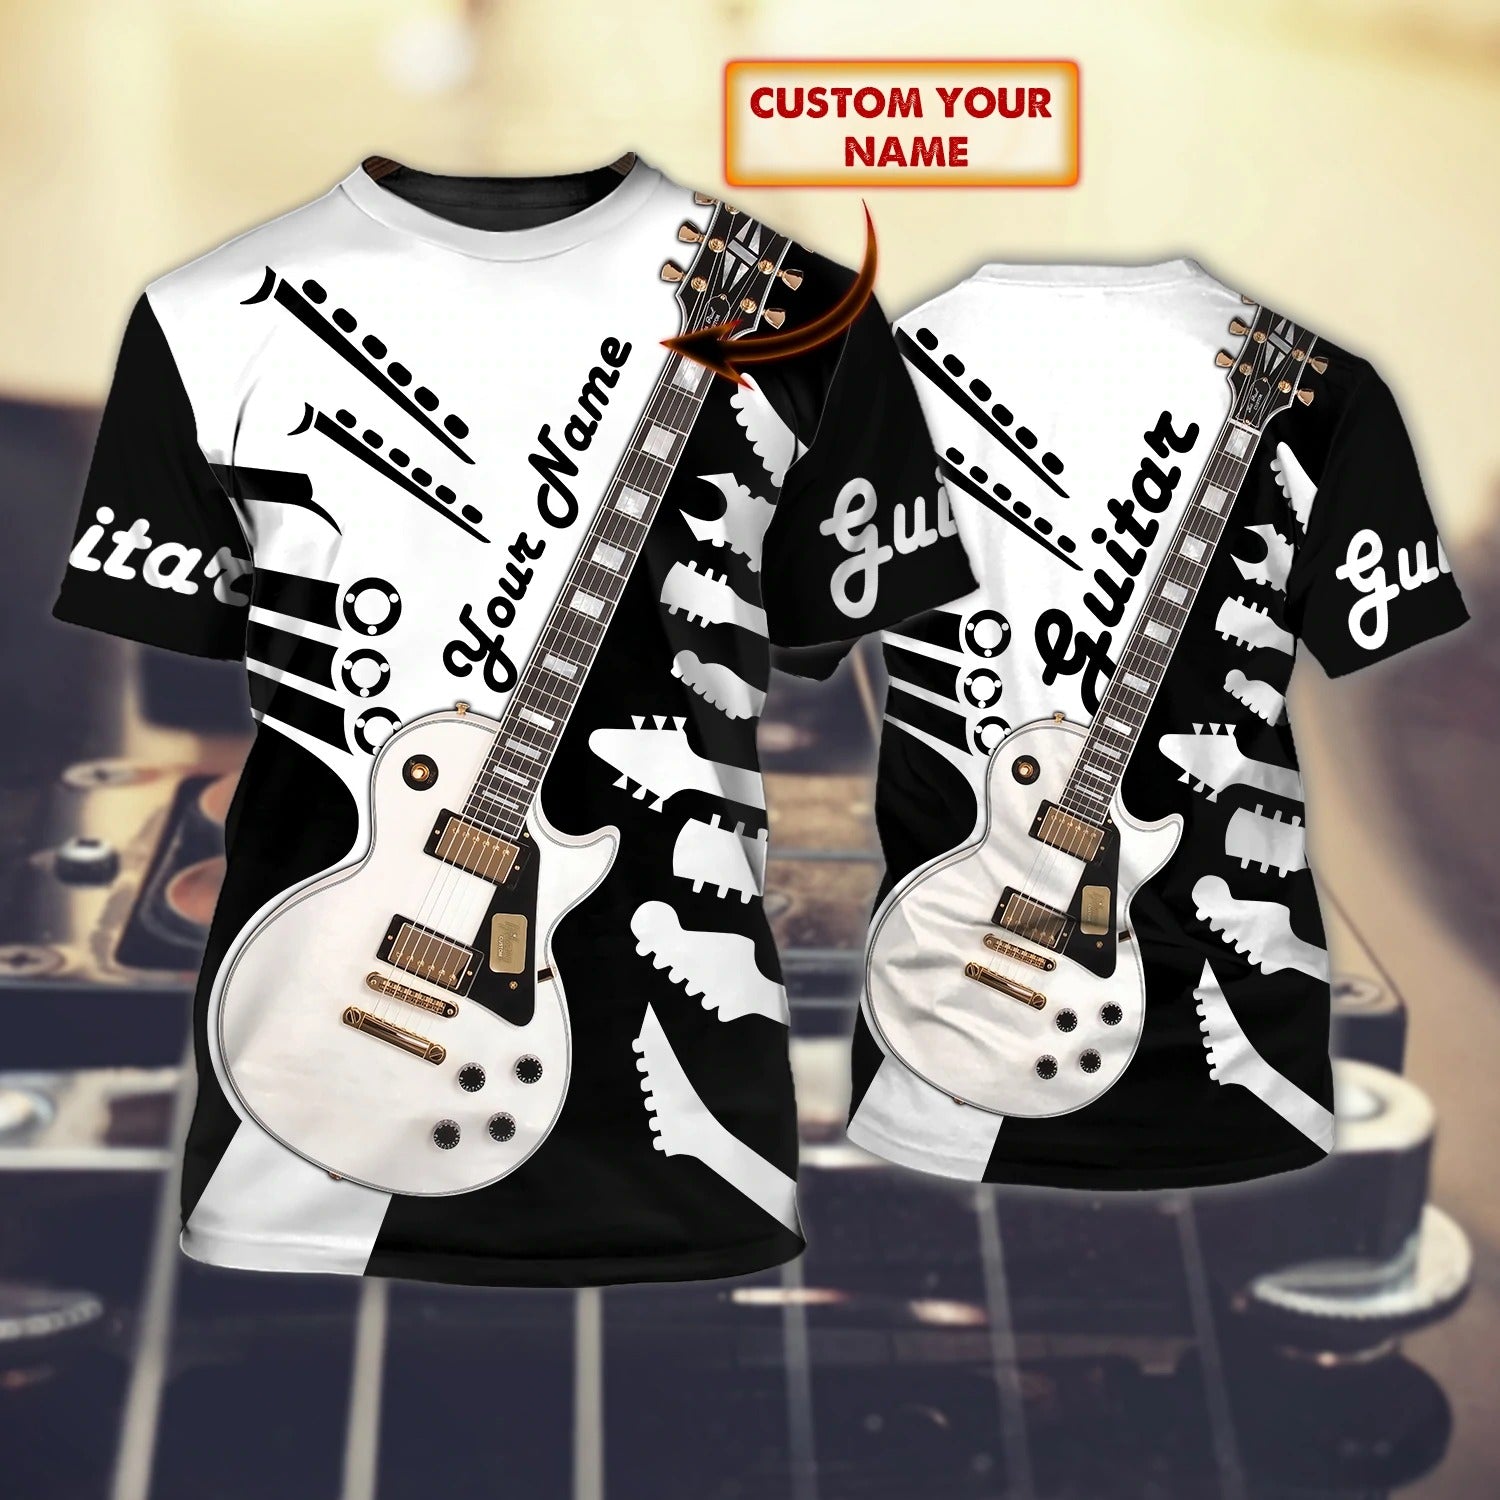 Personalized 3D T Shirt For Guitar Lovers/ Love Bass Guitar 3D Shirt/ Guitar Shirt